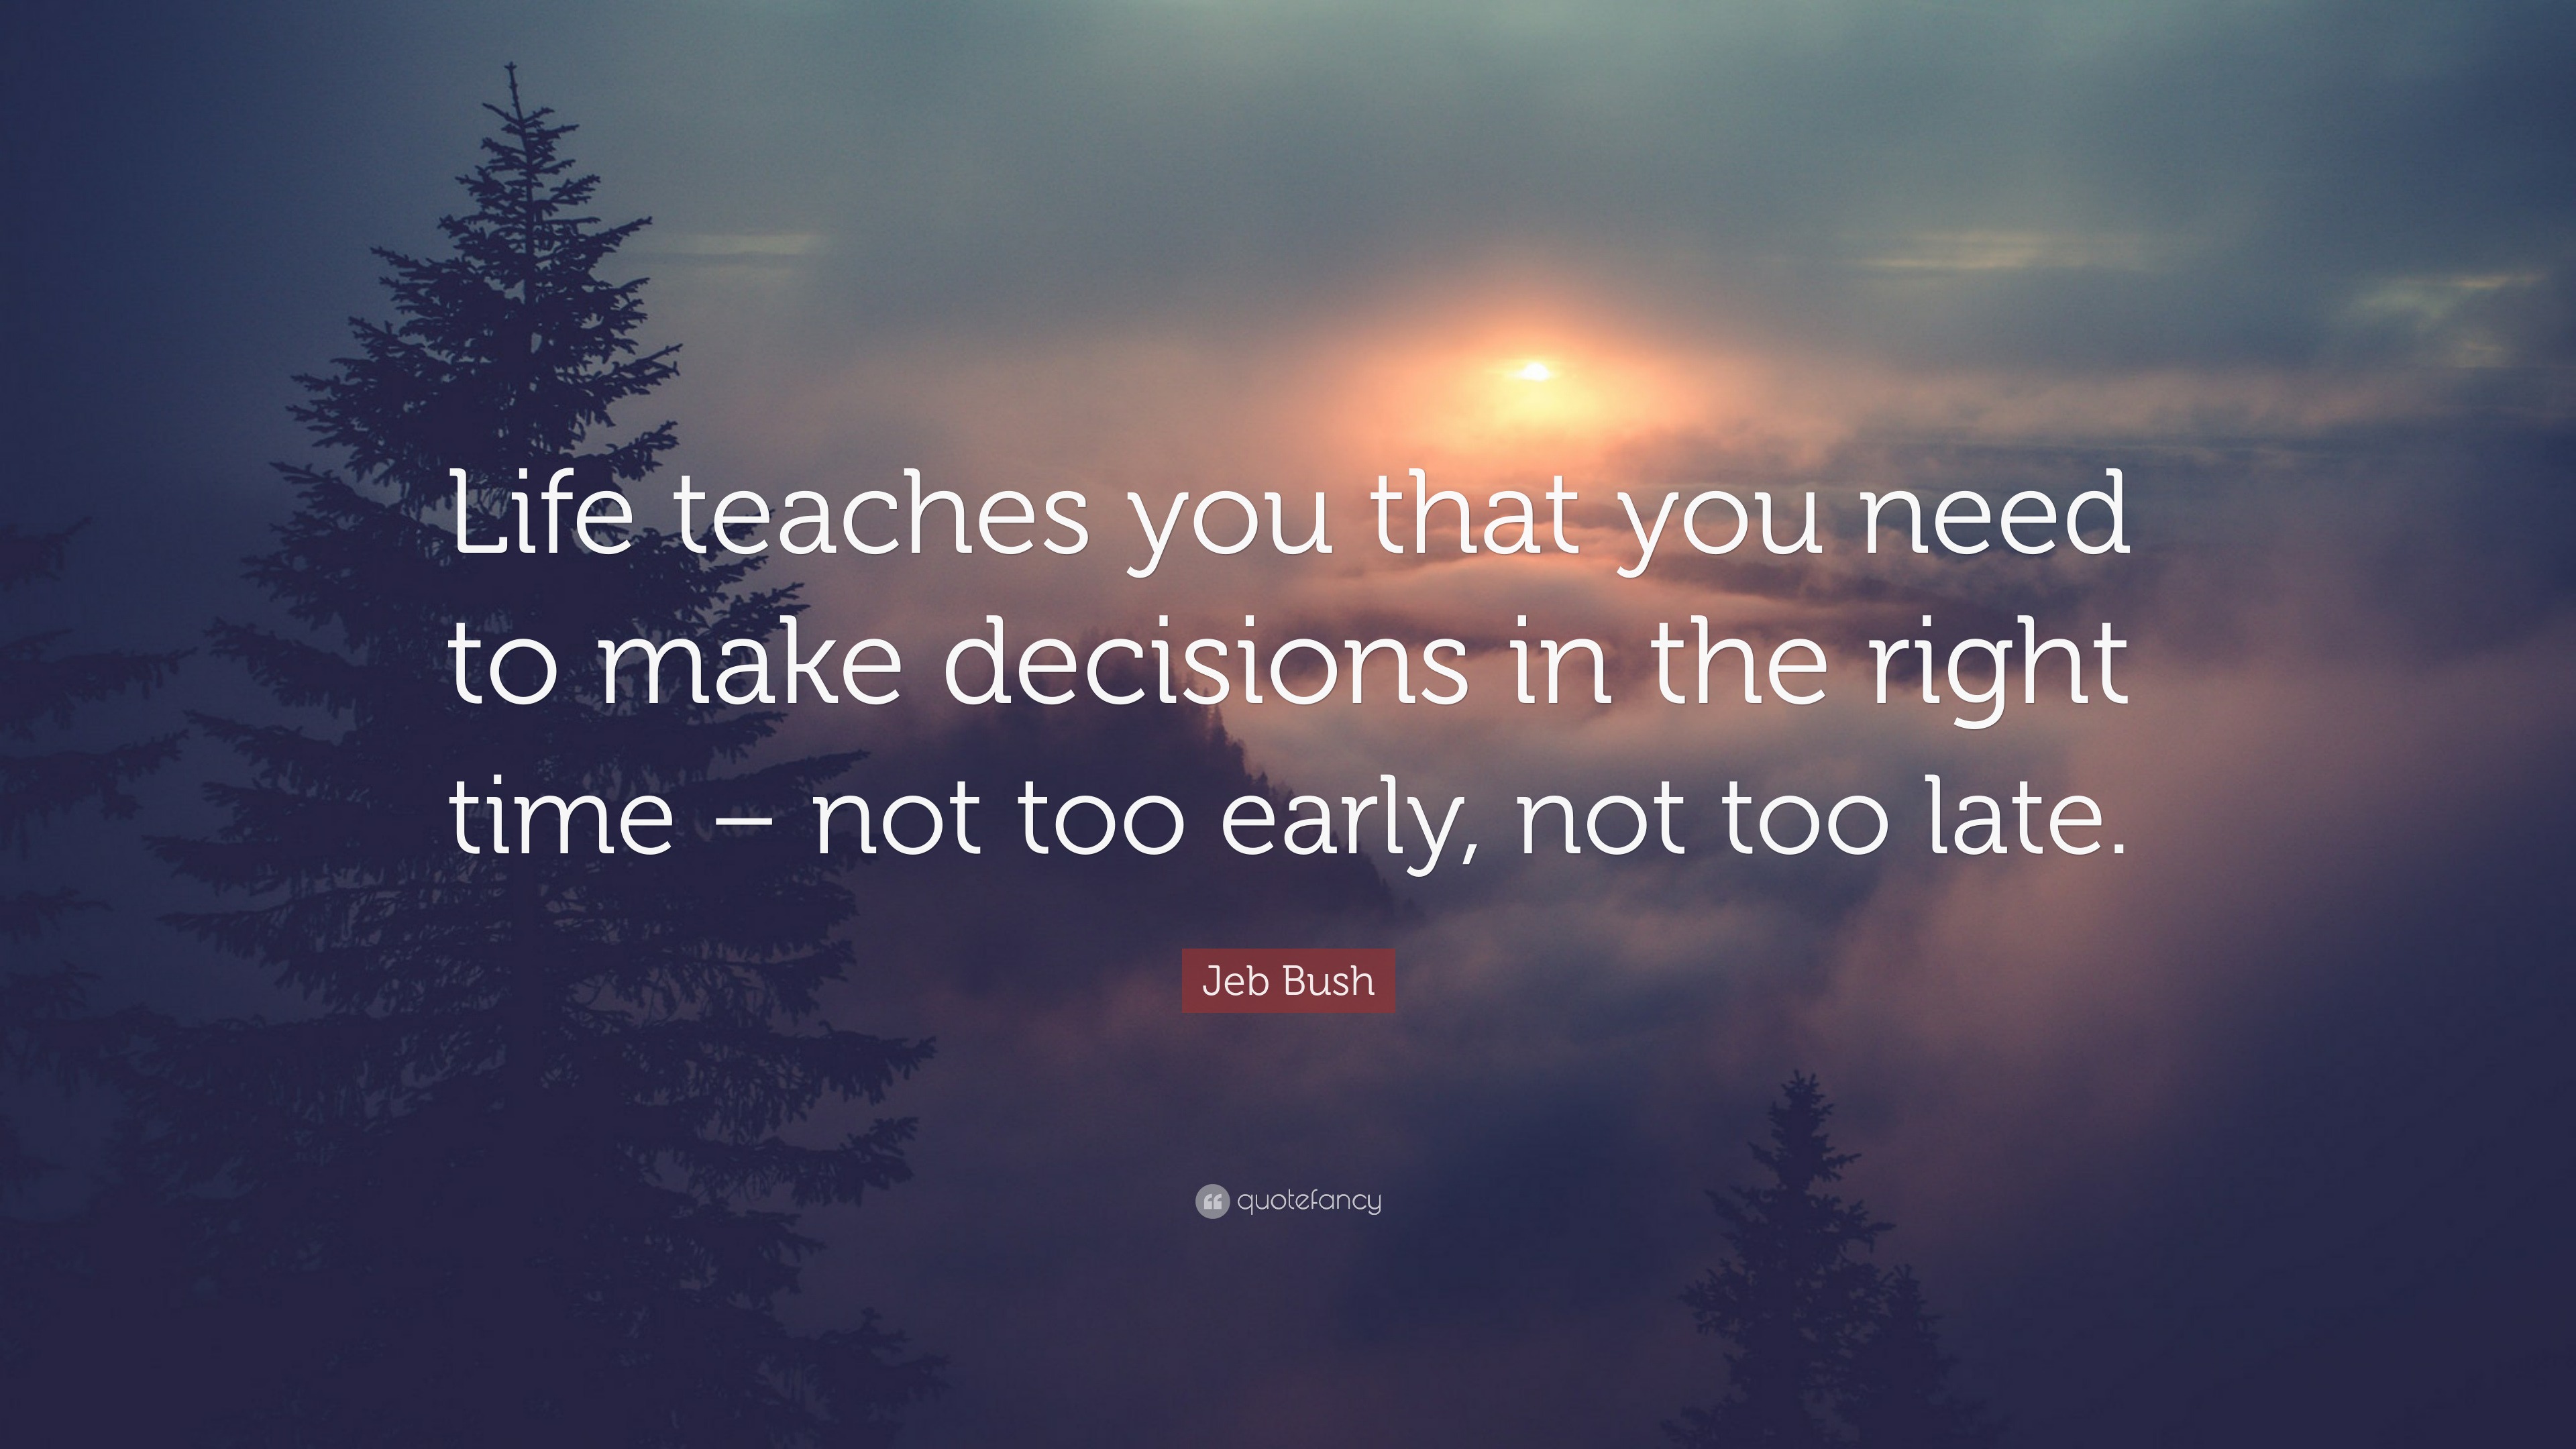 Jeb Bush Quote “Life teaches you that you need to make decisions in the